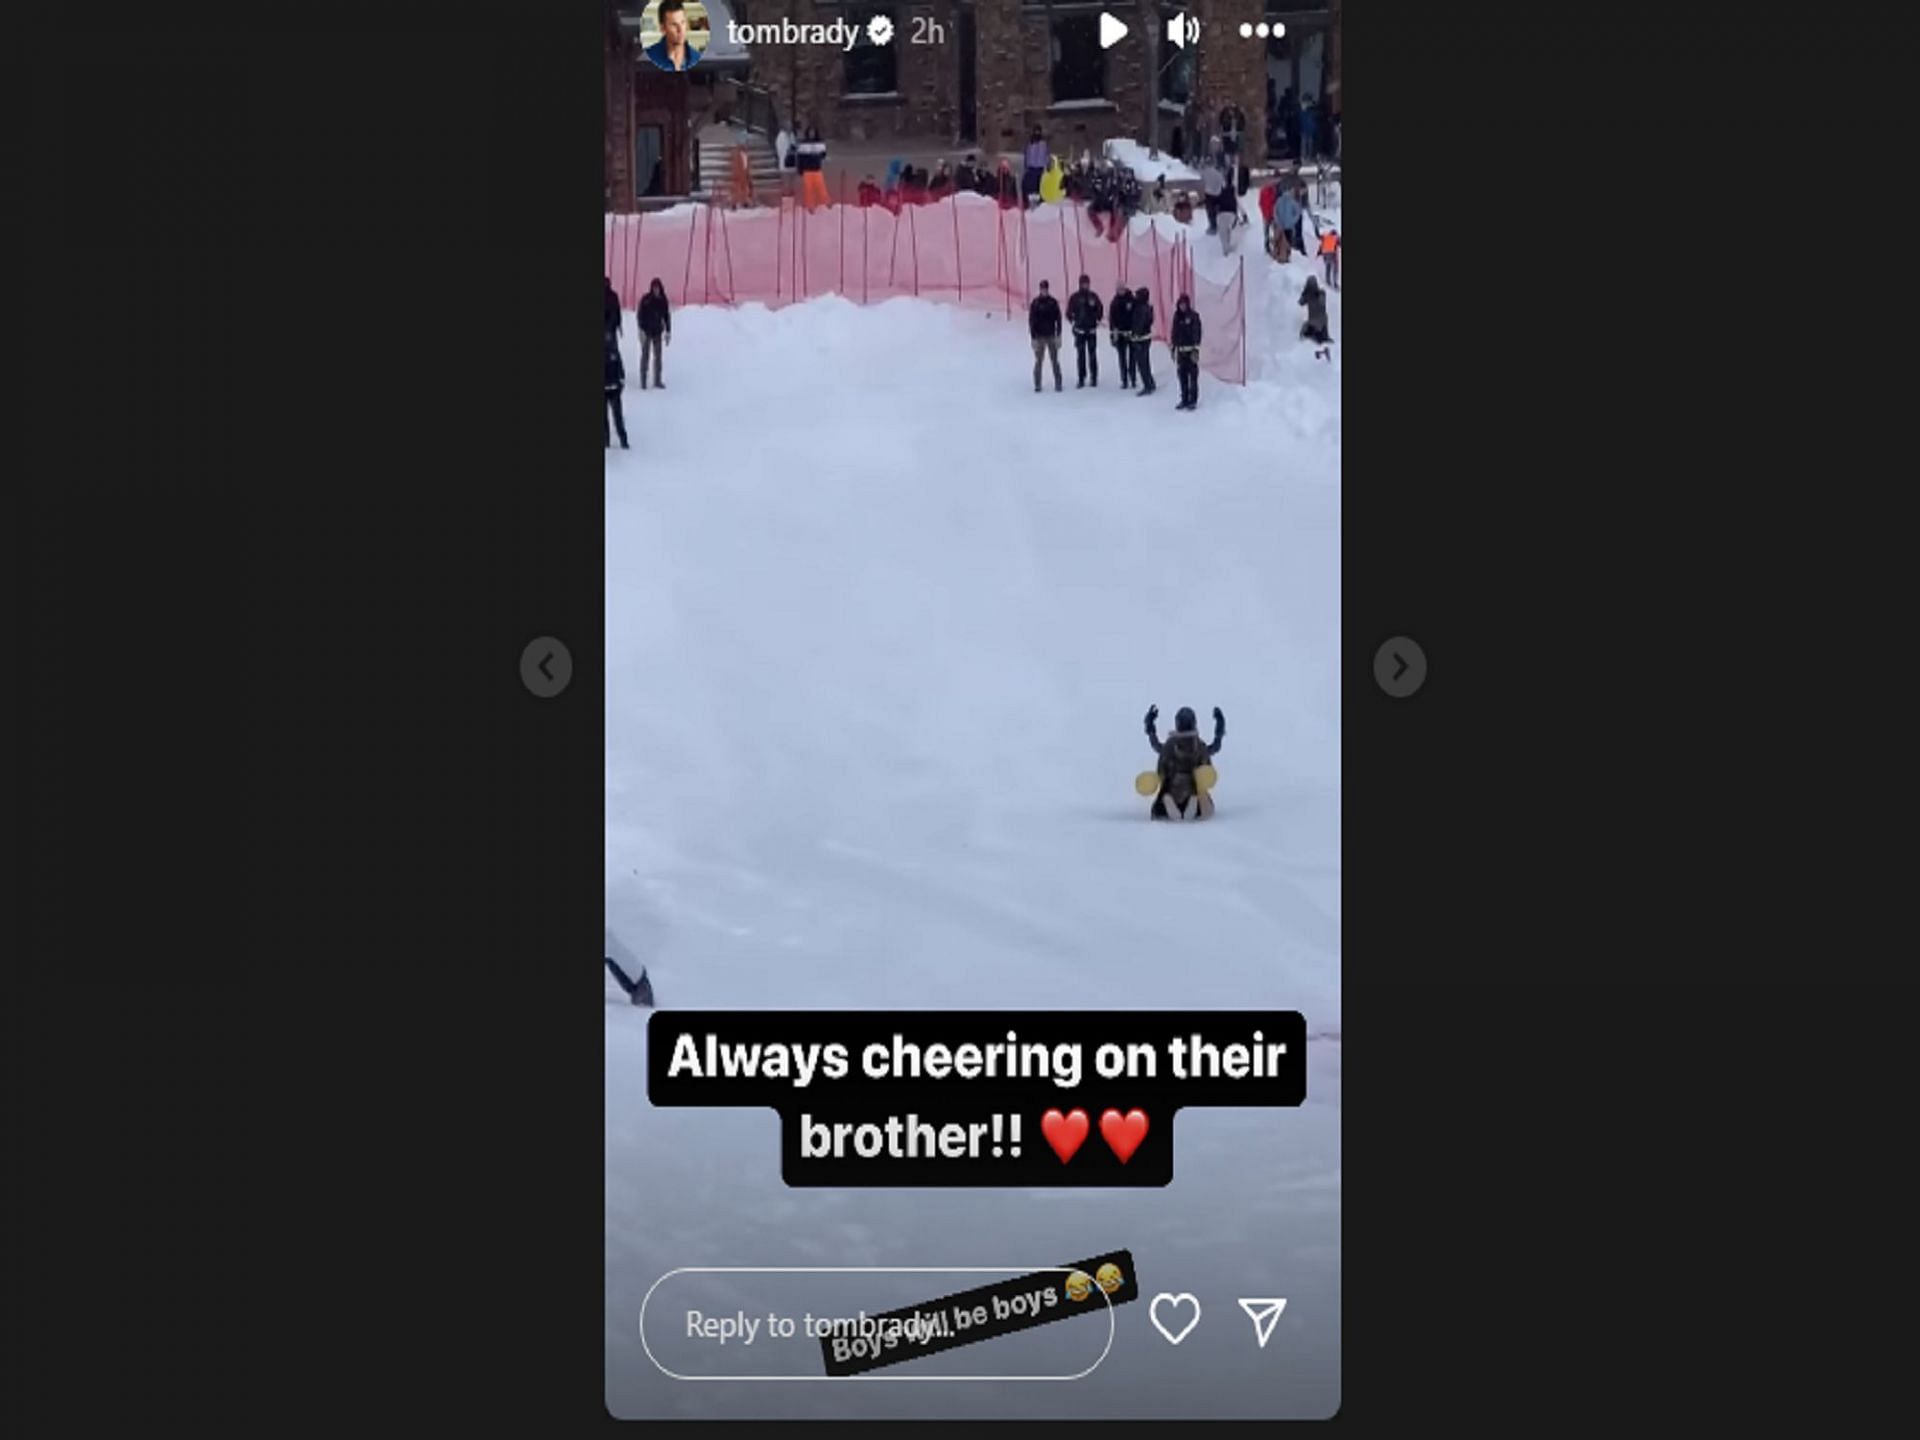 No. 12 watches kids finish sled run - Courtesy of QB on Instagram